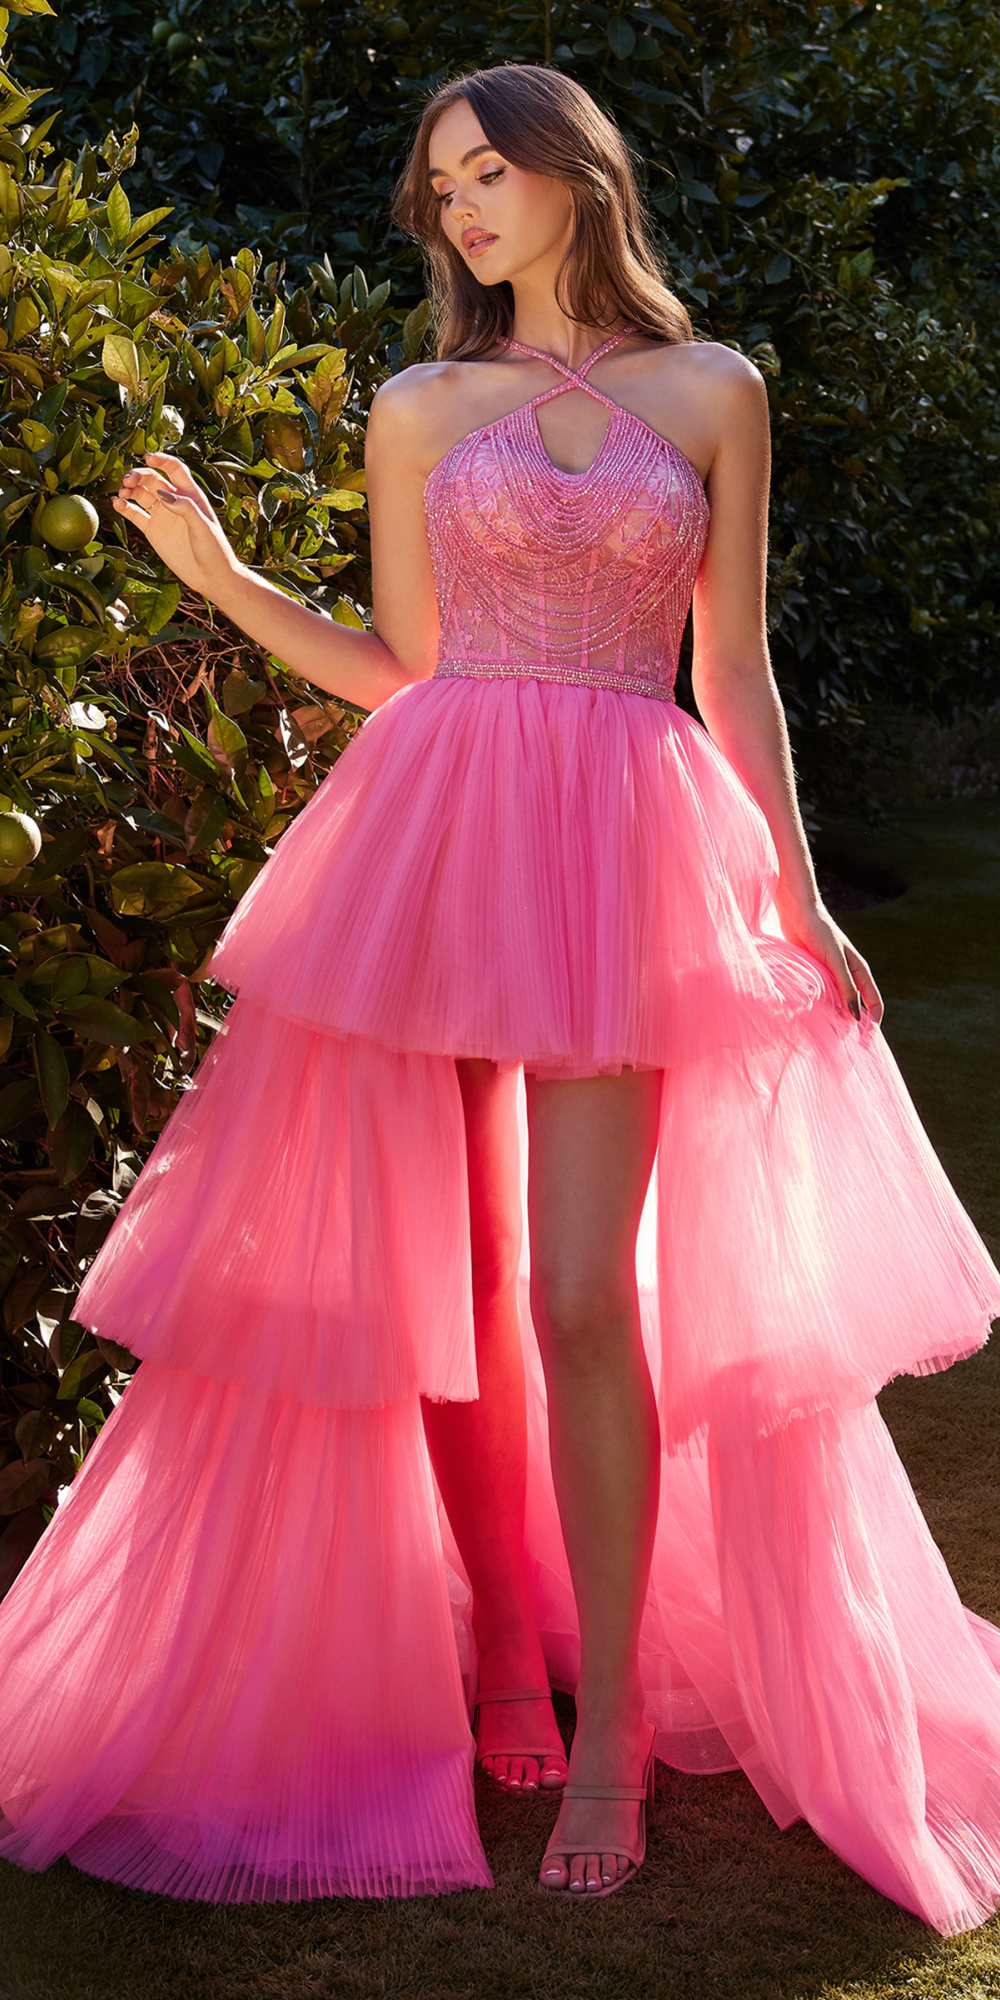 Andrea & Leo A1239 High-Low Halter Strap Beaded Ball Gown - Pink